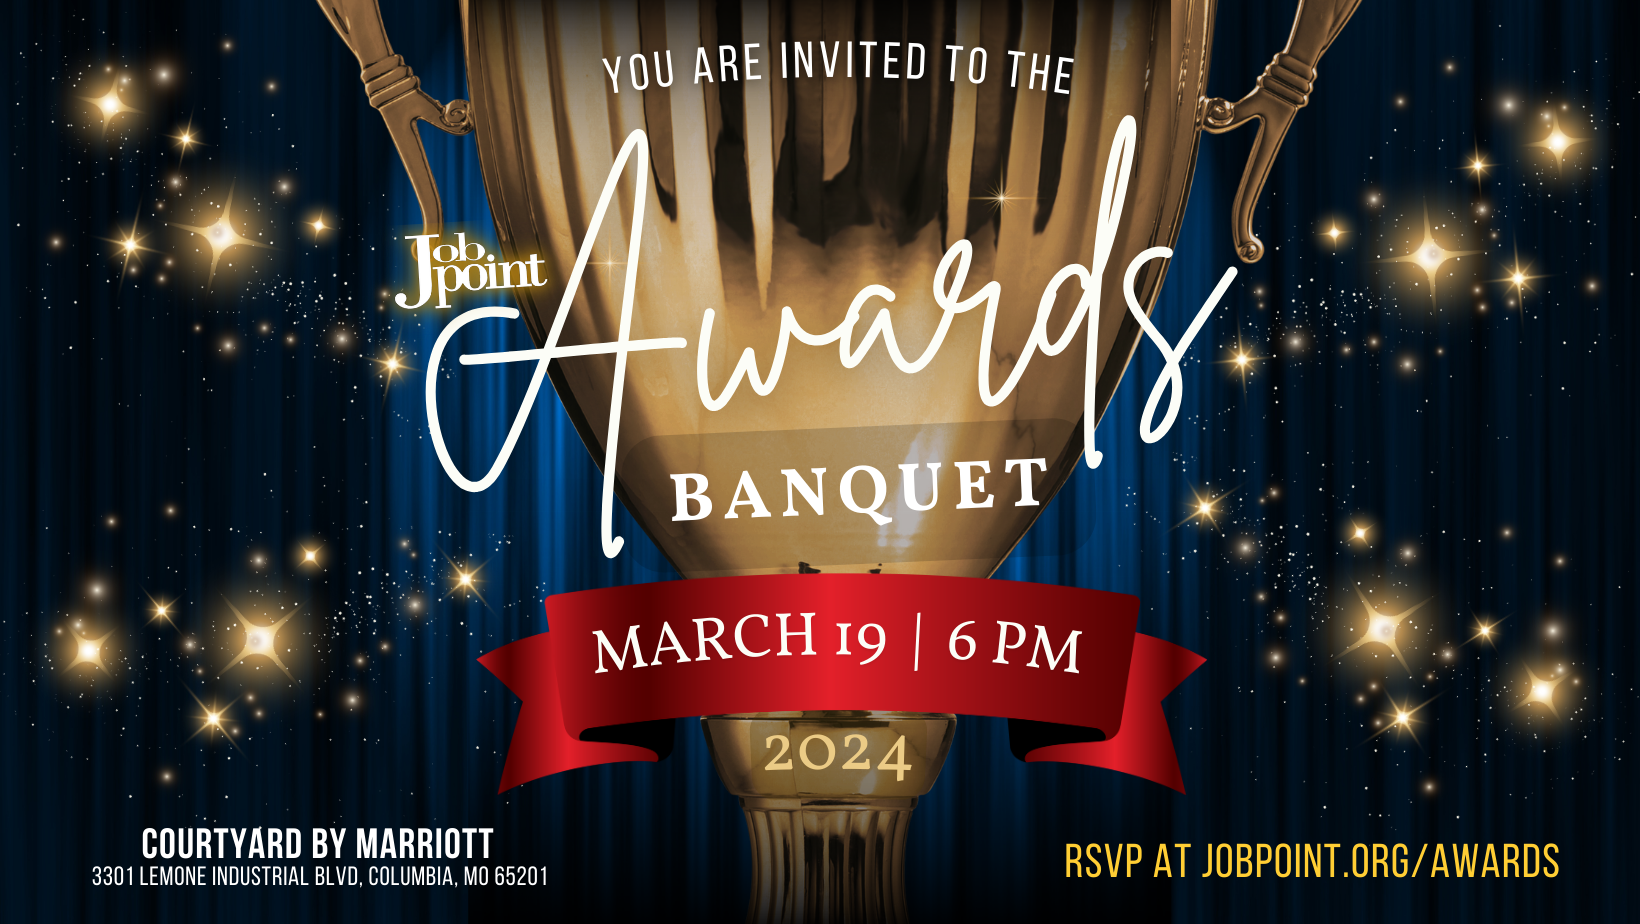 2024 Job Point Annual Awards Banquet at Courtyard by Marriott. Doors at 6 pm on March 19